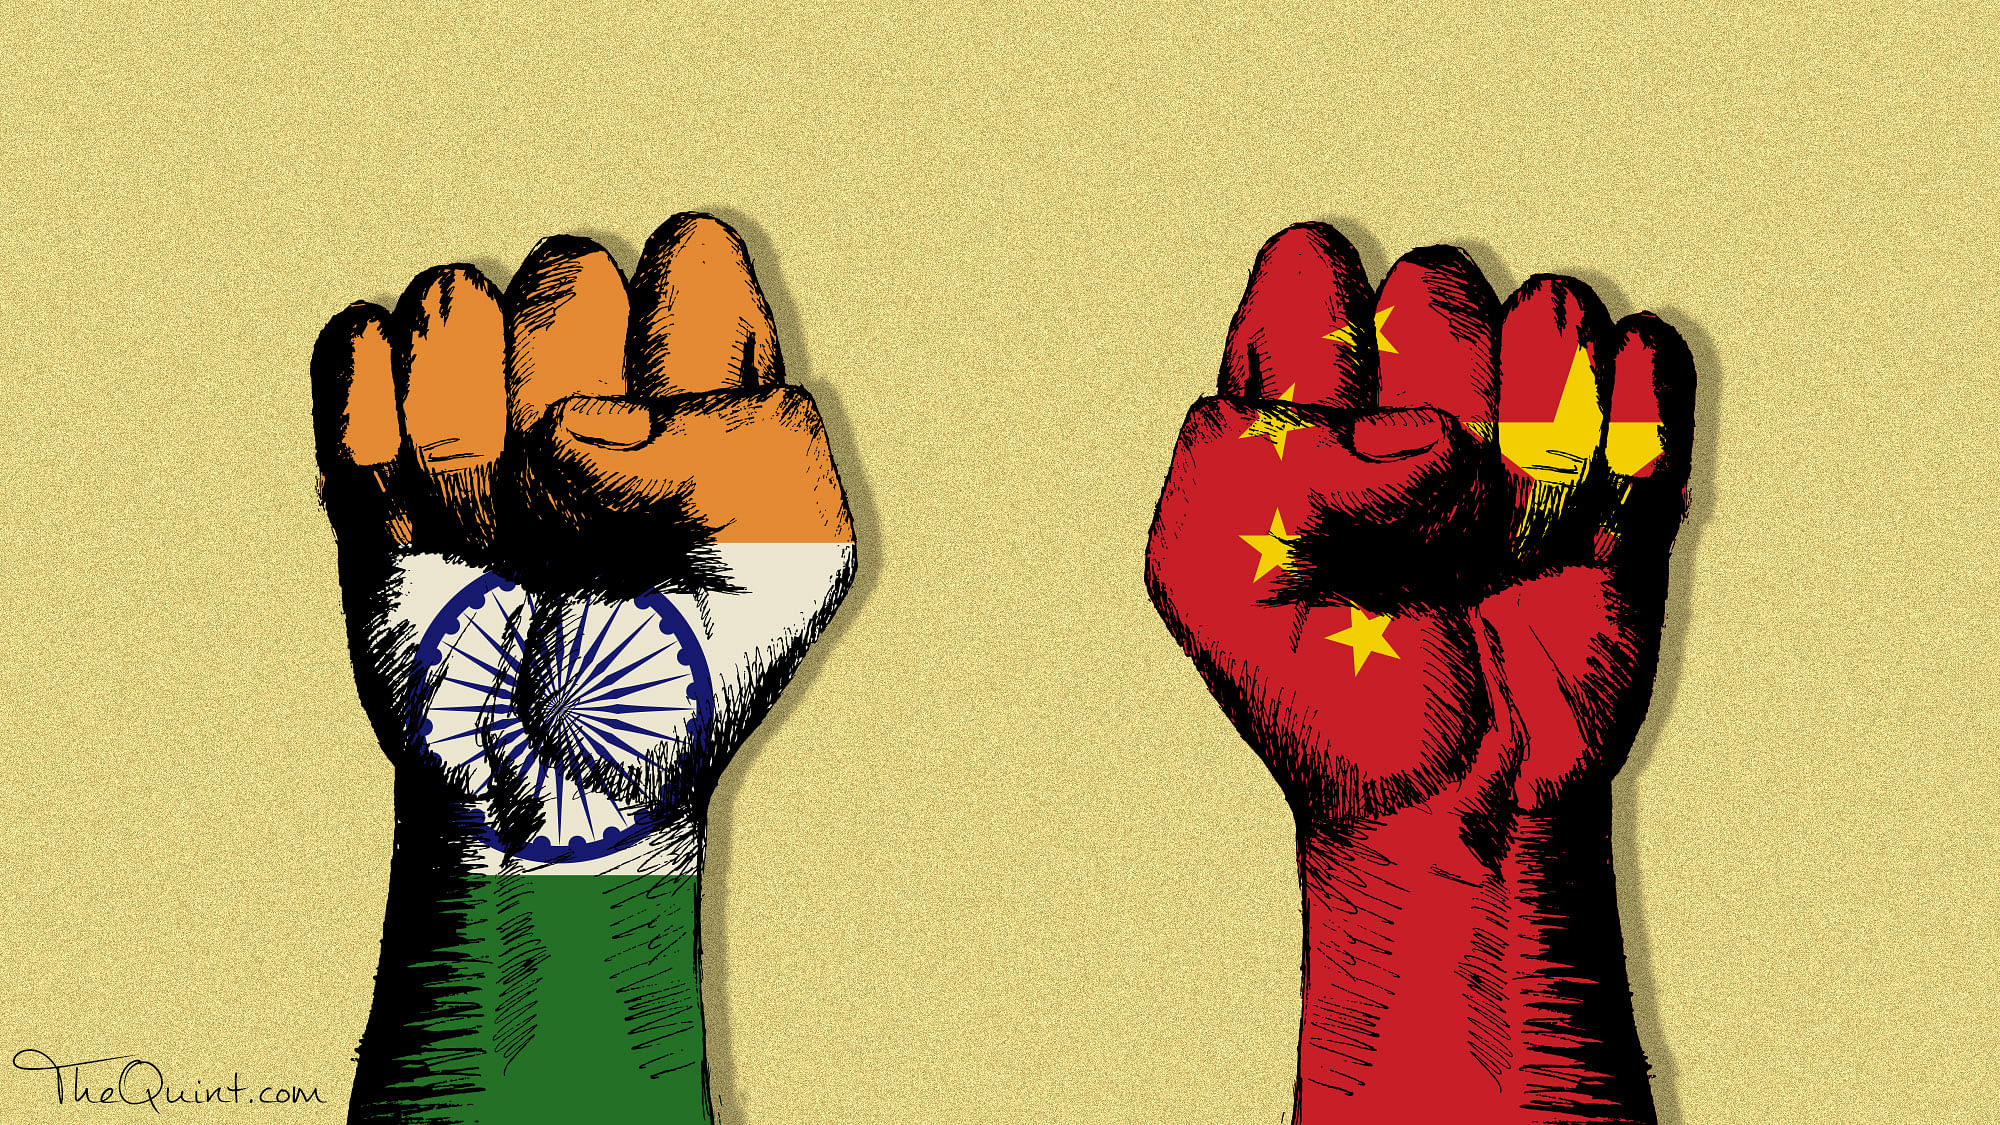 Frederic Grare’s new book gives an insight into the India-China dynamic.